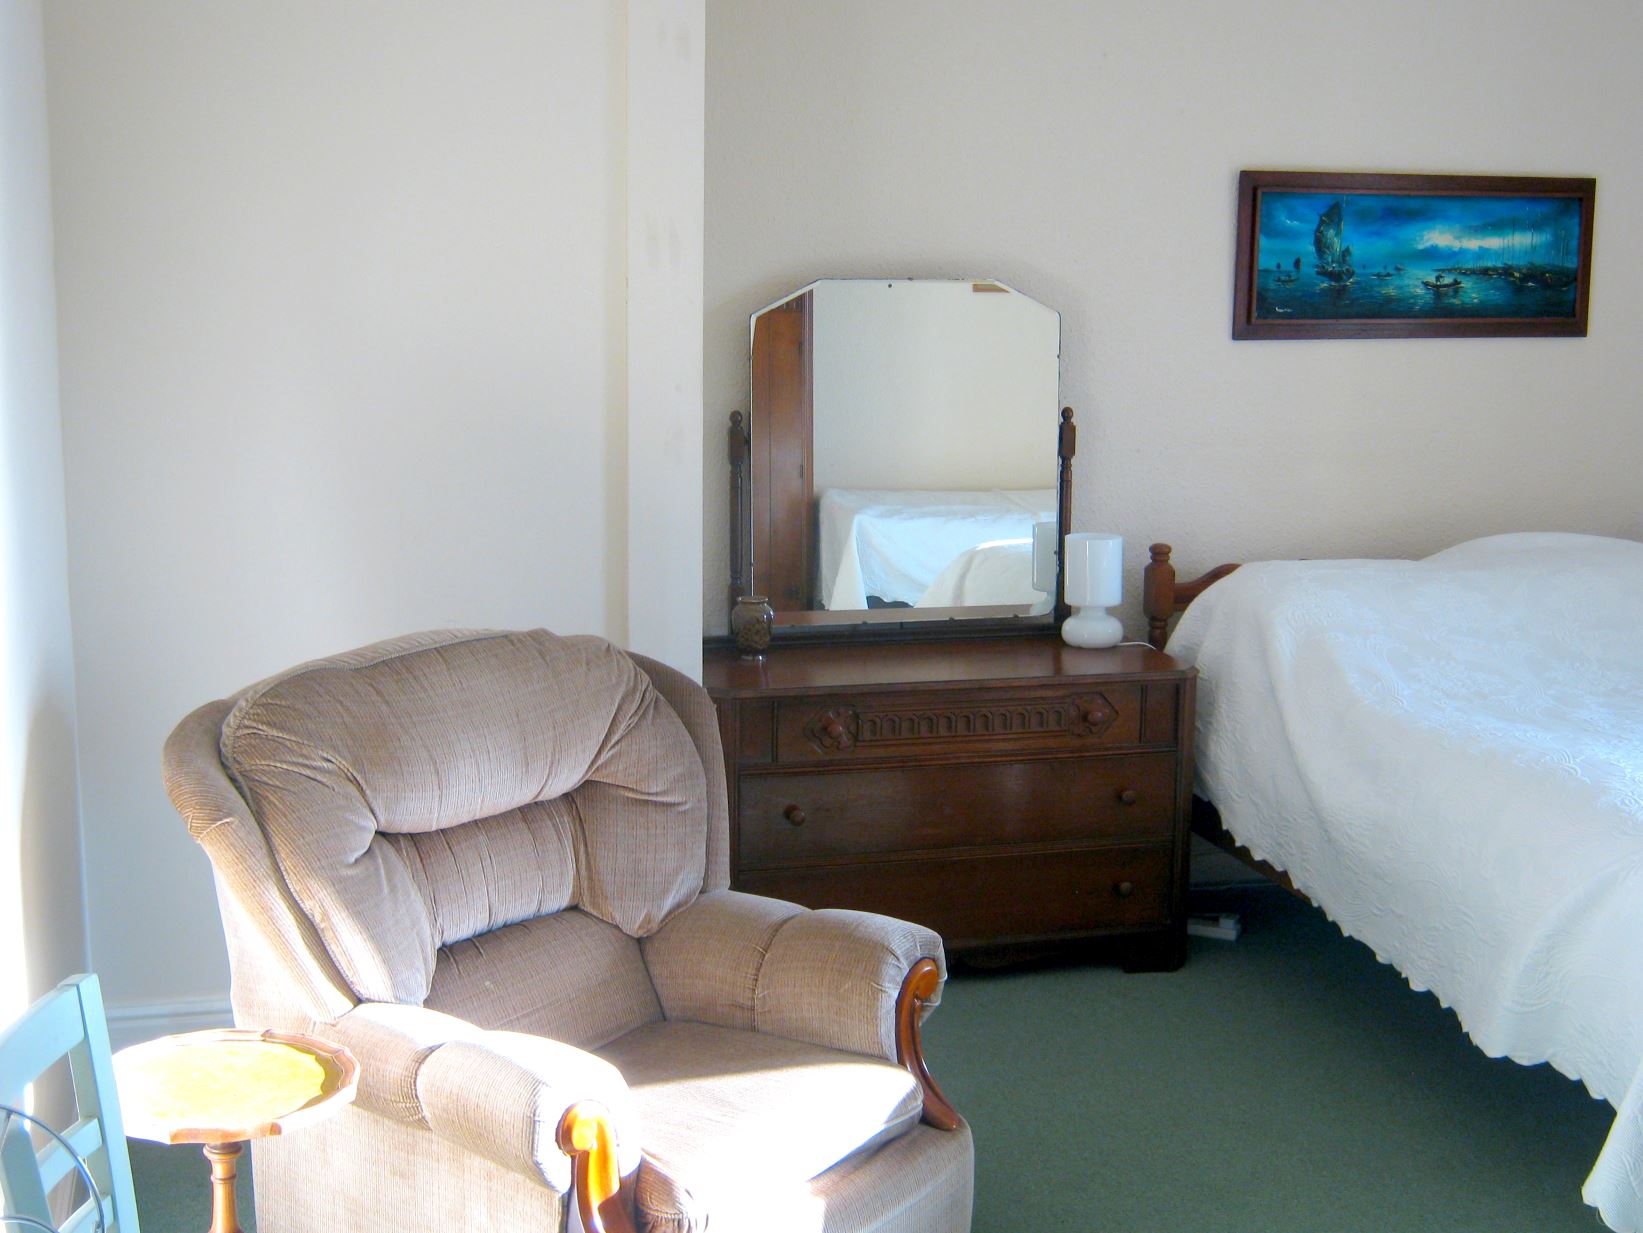 Photo showing part of main bedroom